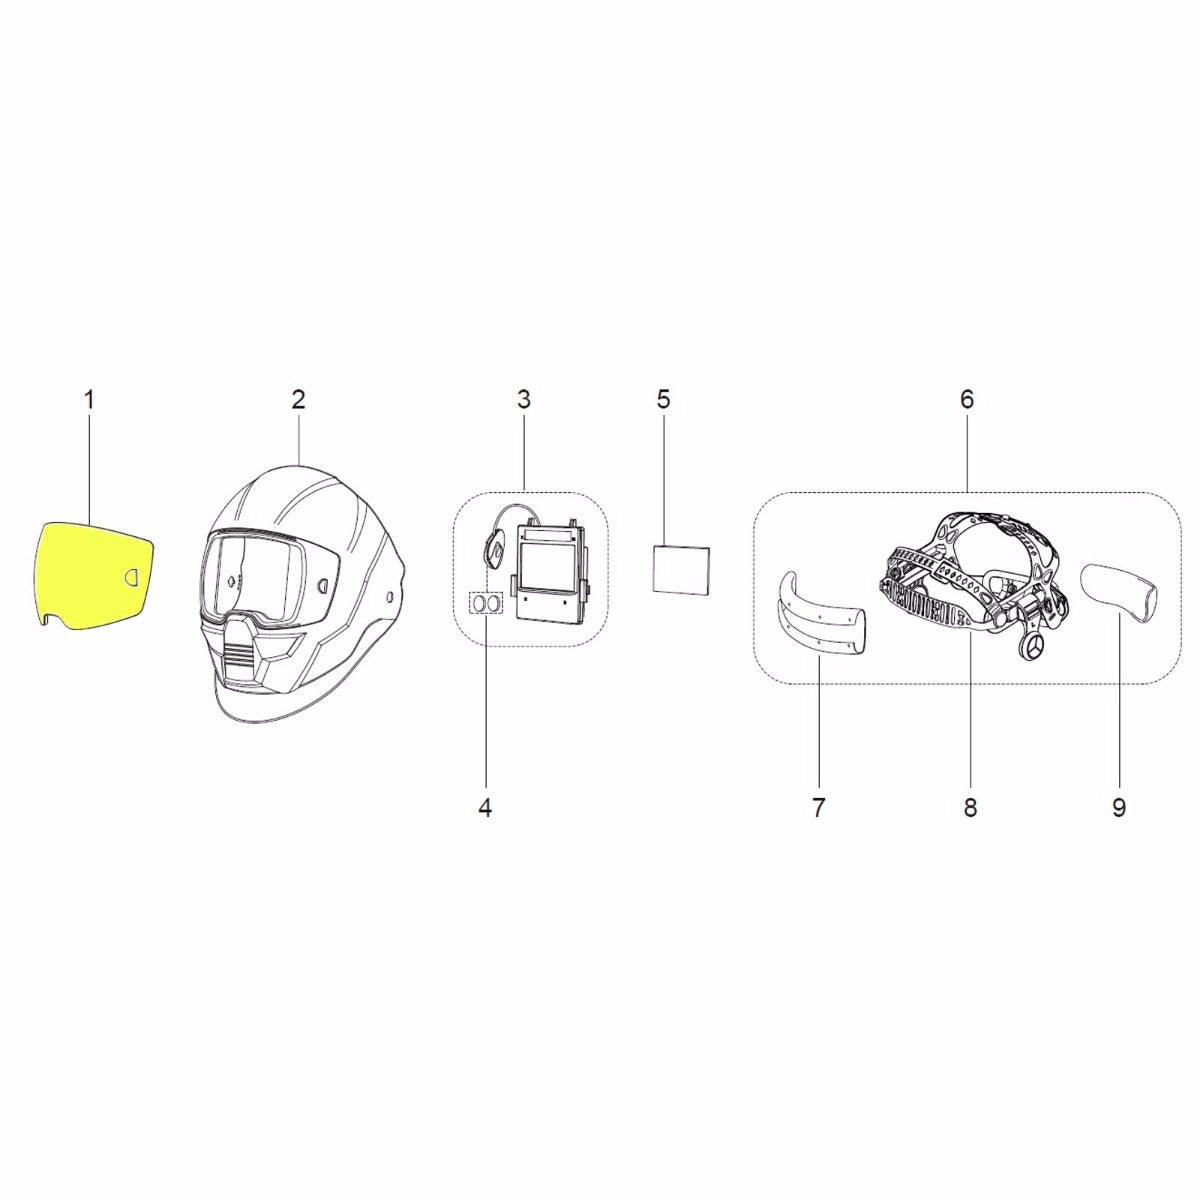 ESAB Sentinel A50 Clear Front Cover Lens - Pkg of 5 (0700000802)